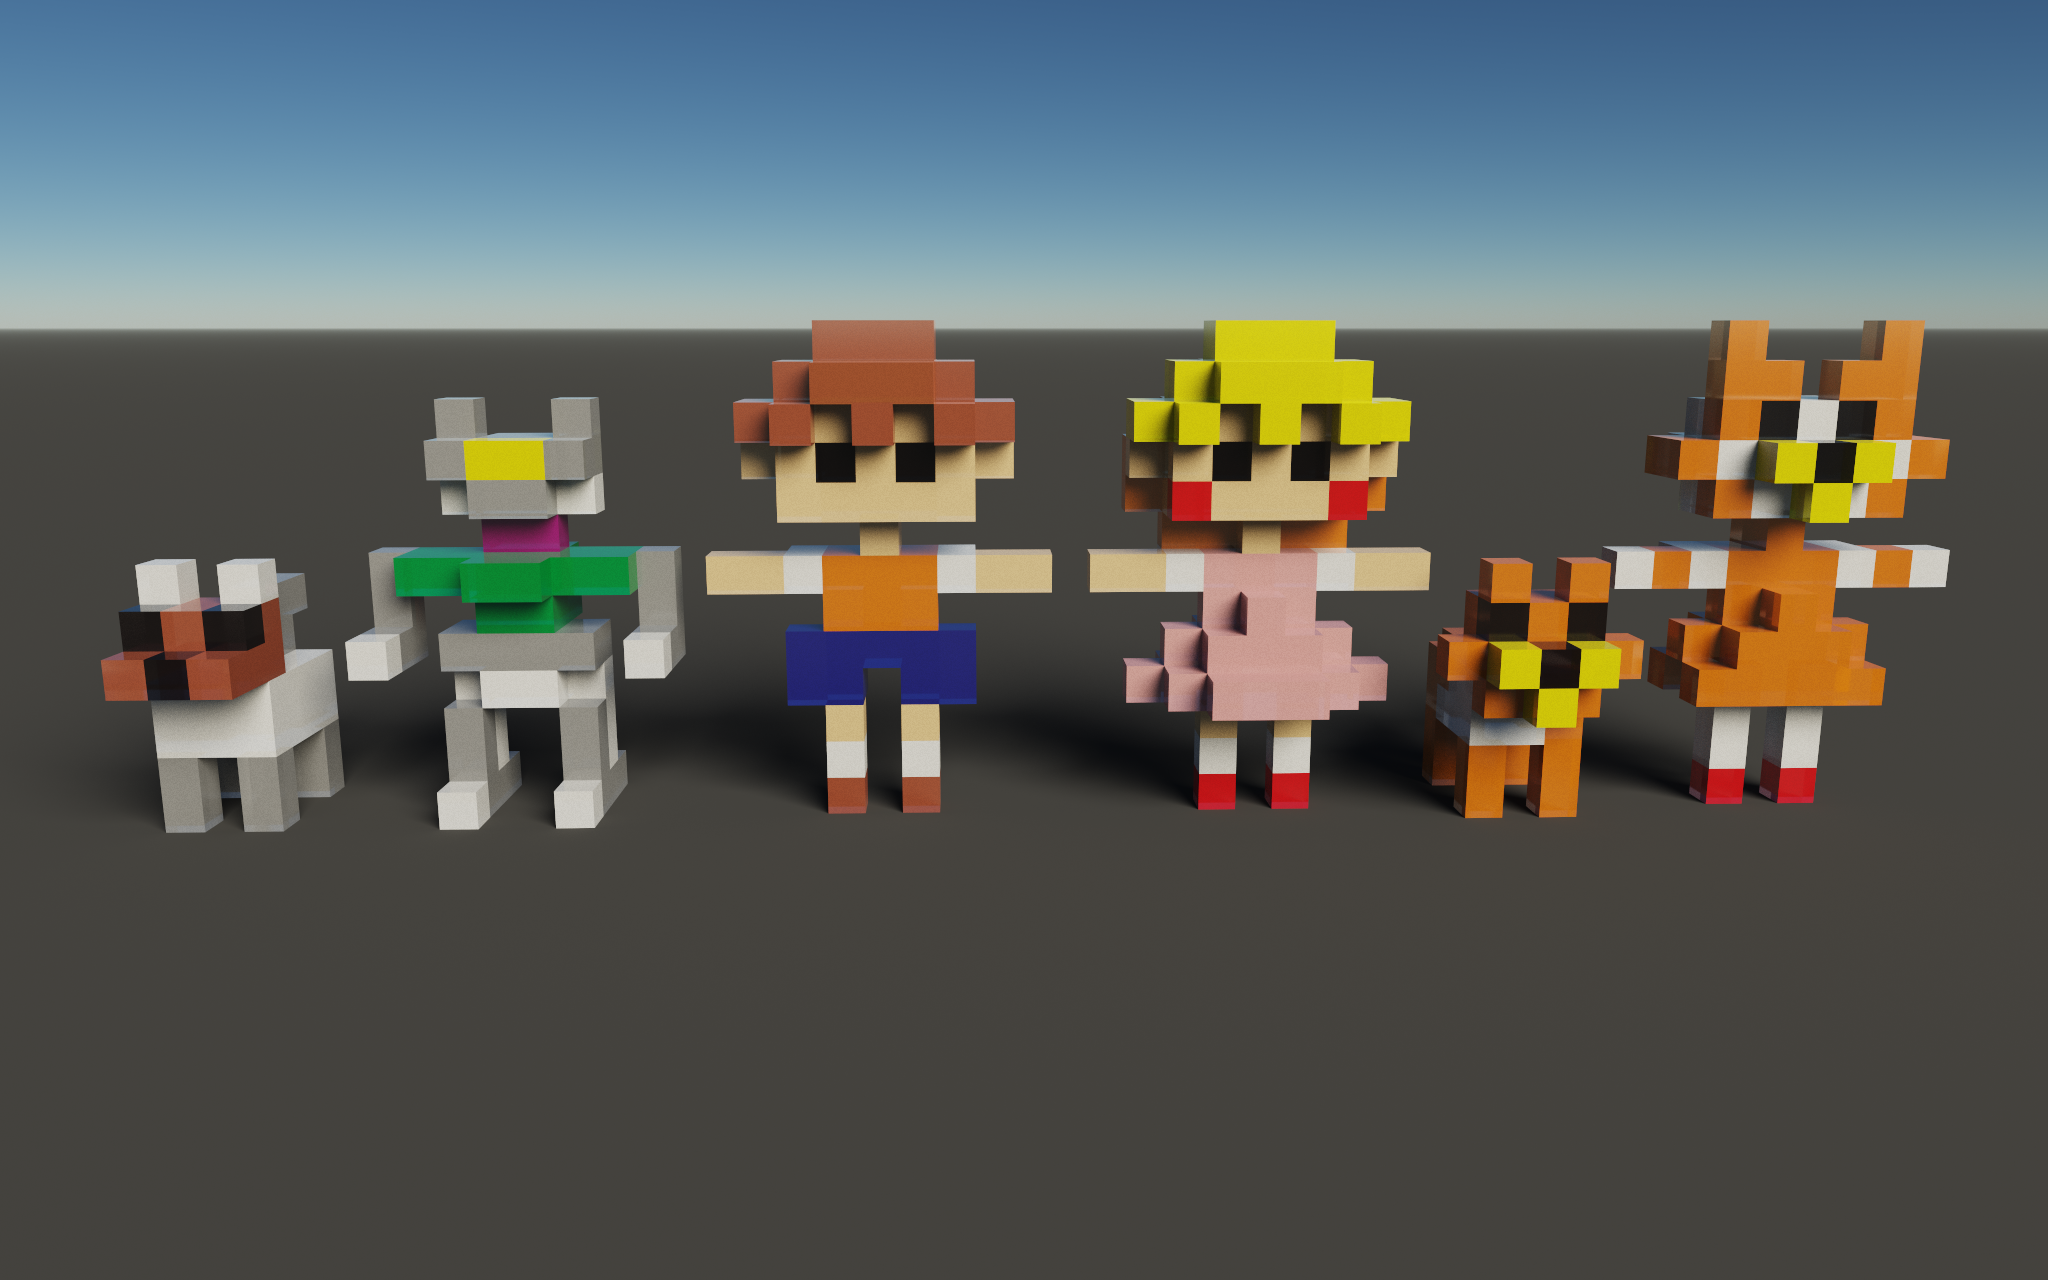 Six characters designed by PC free software MagicaVoxel